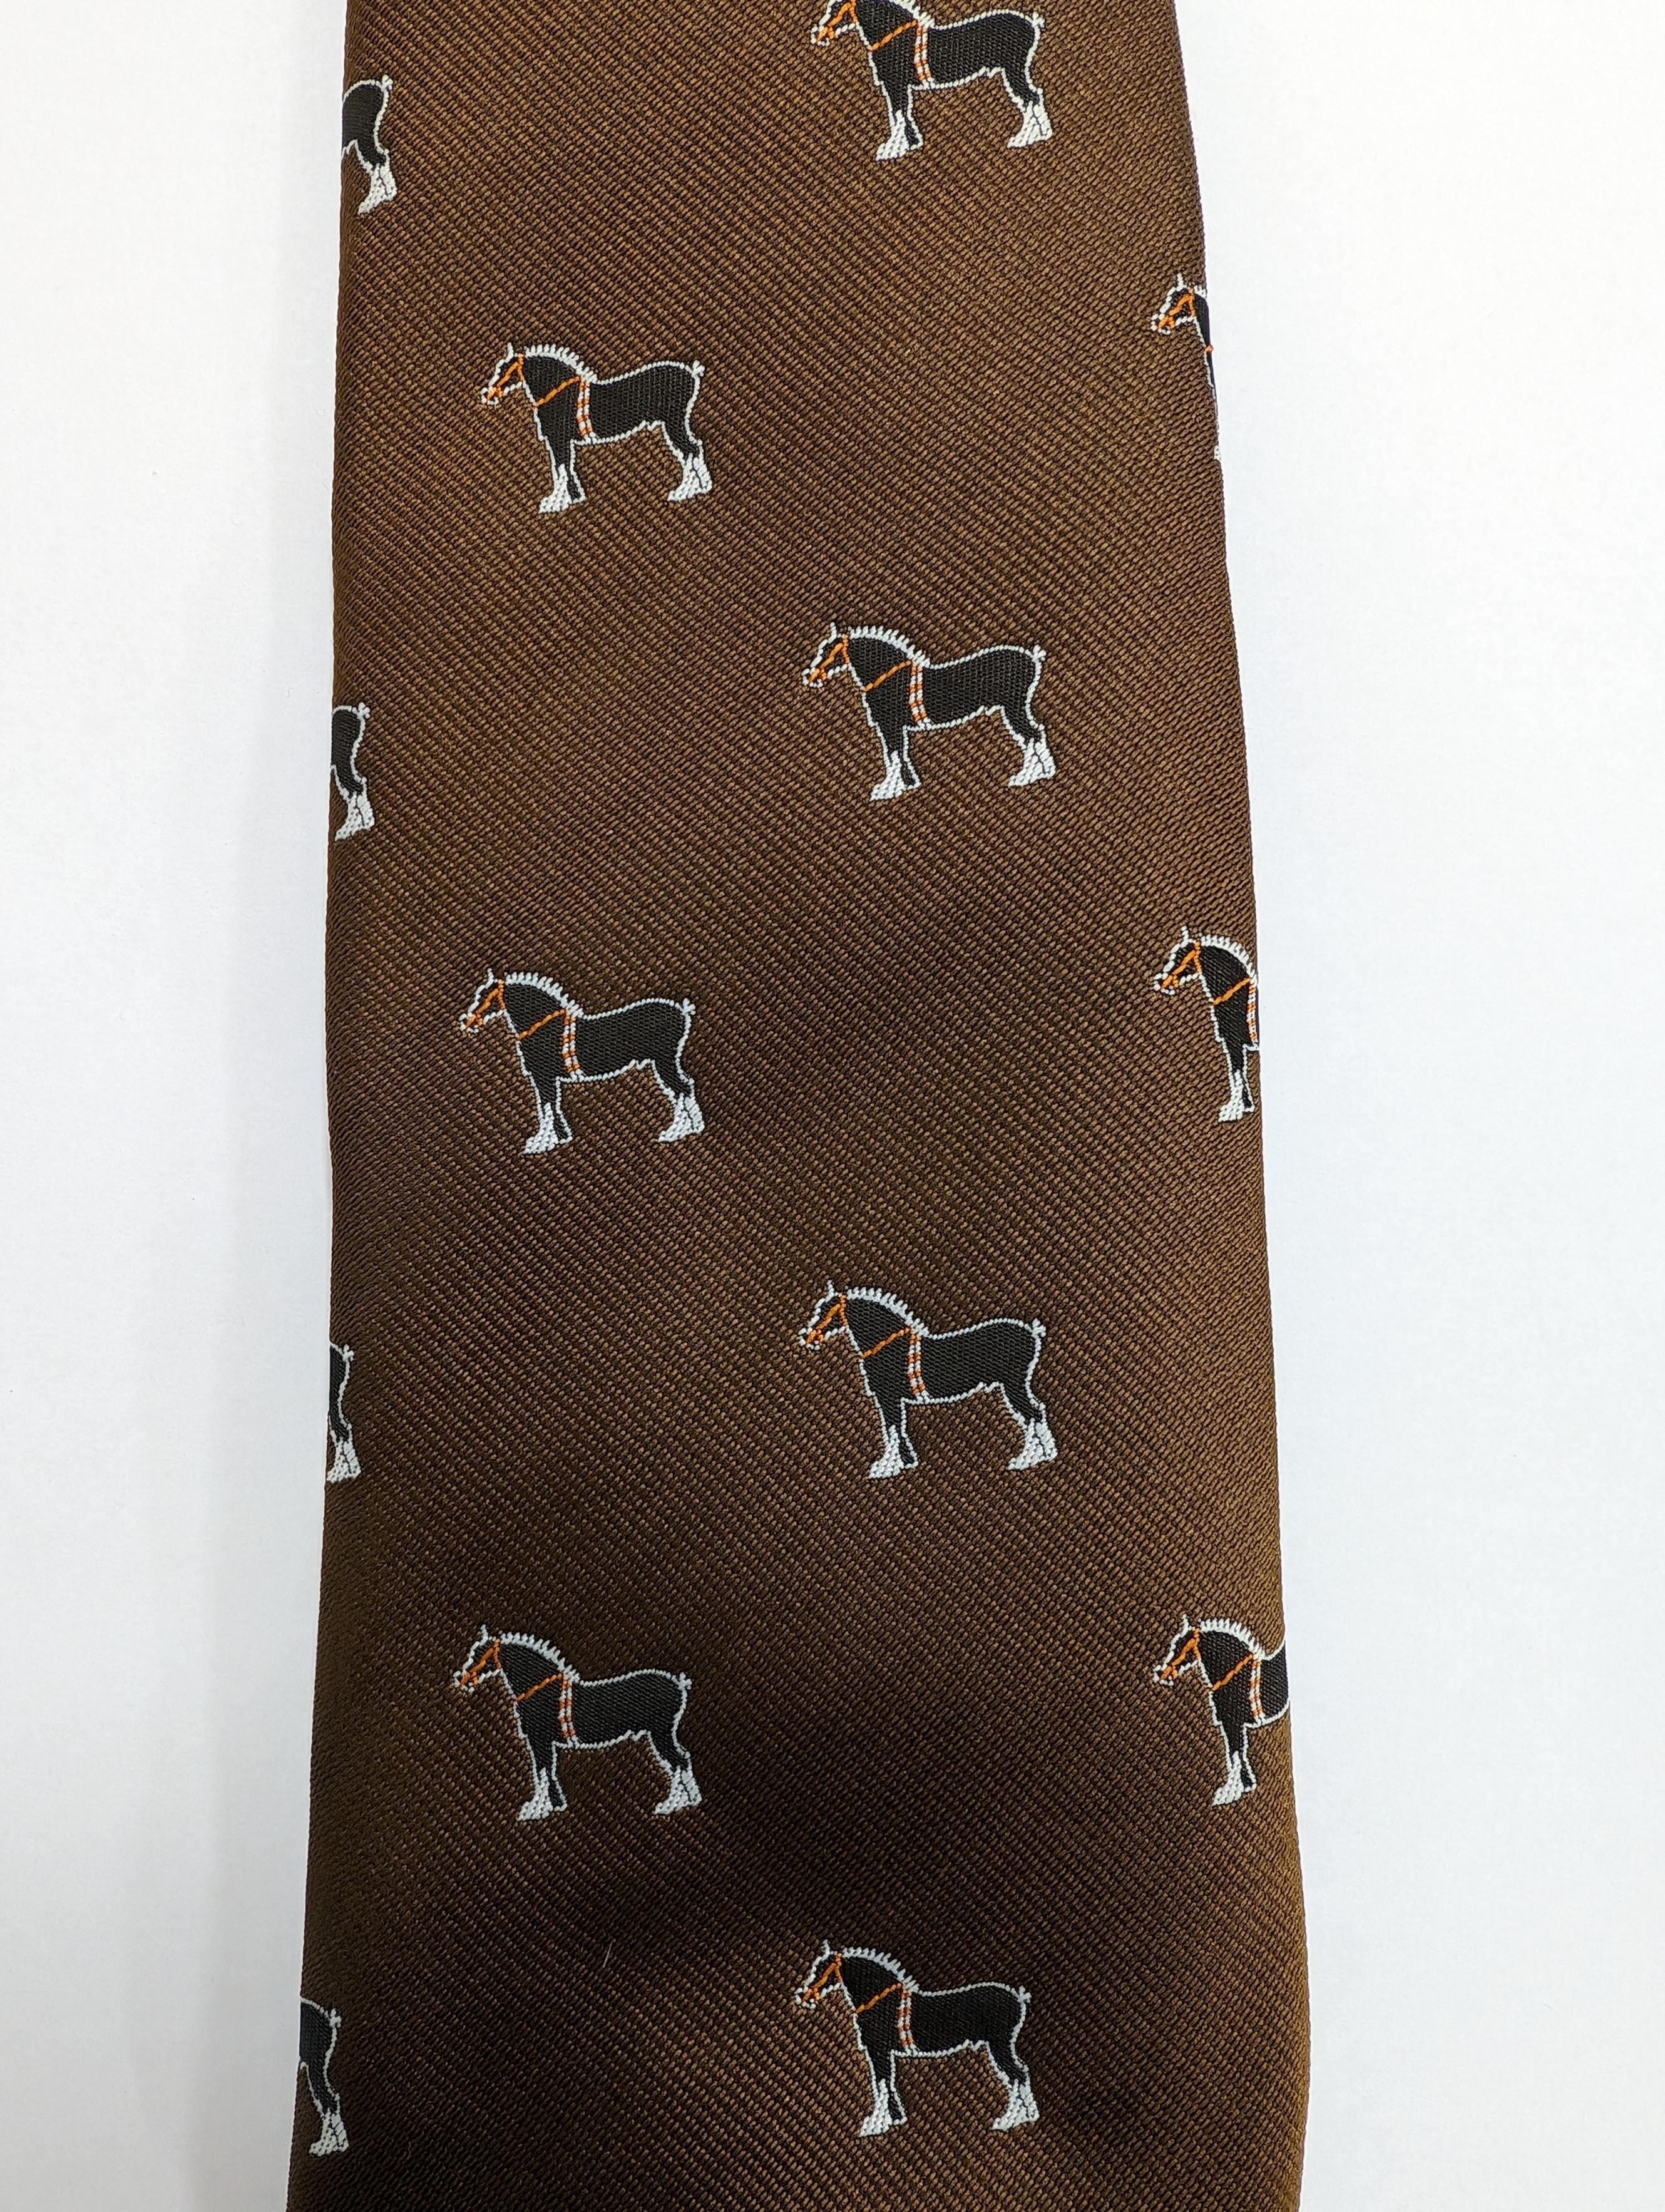 Tie - Brown with Shire Horse repeat design